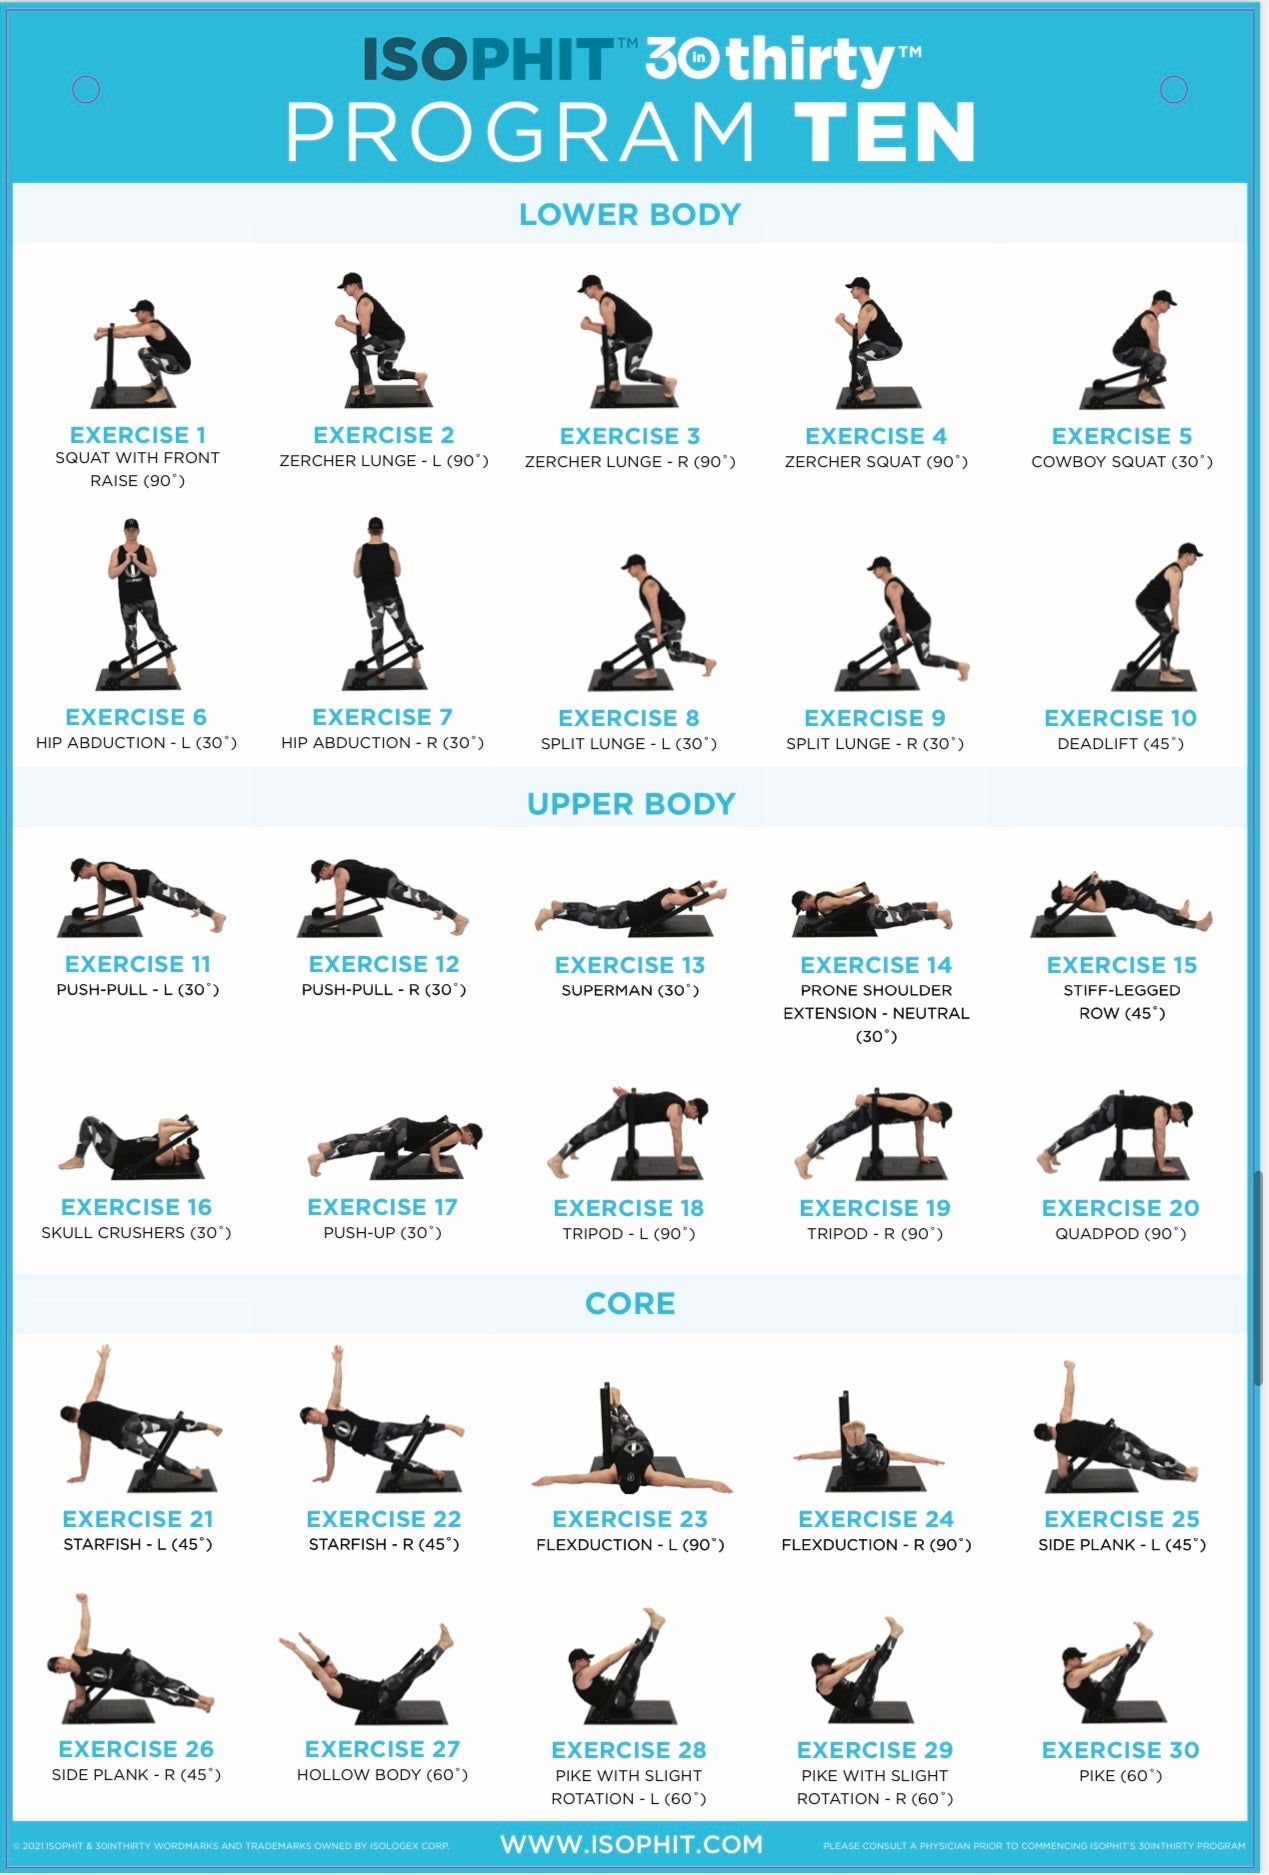 30inThirty™ Strength Series - [15 Digital Posters]